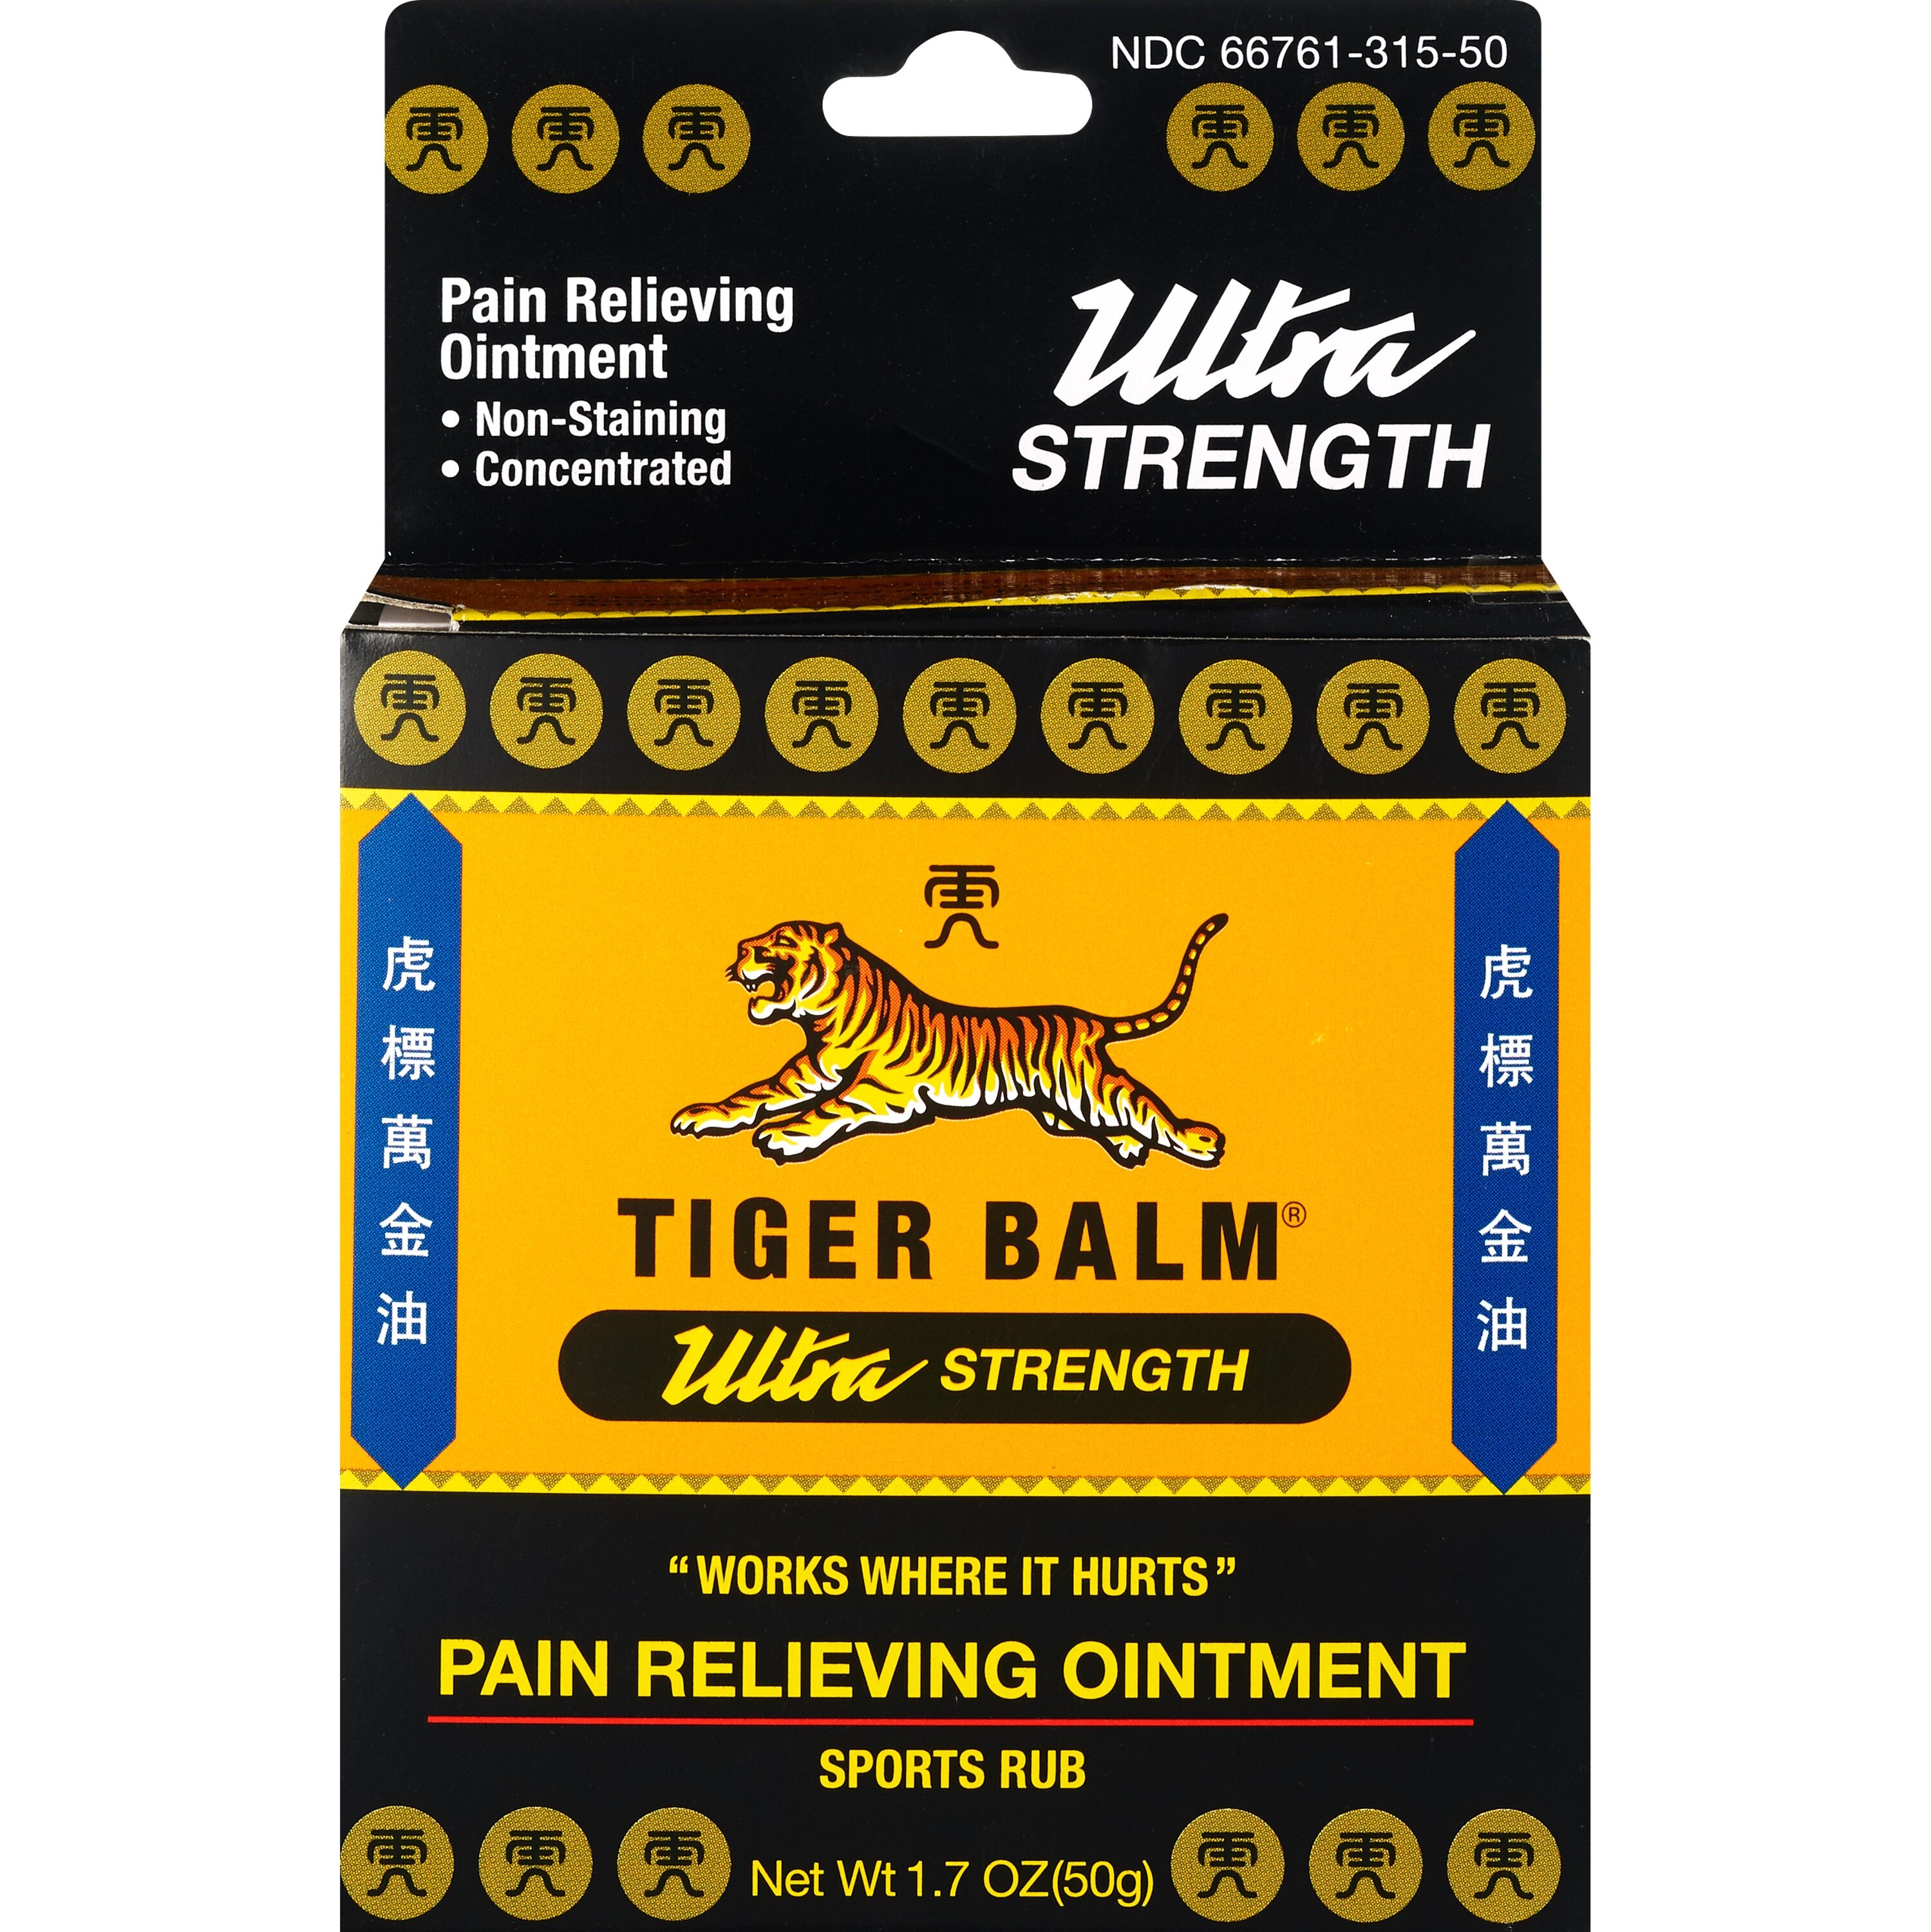 Tiger Balm Sports Rub Ultra Strength Pain Relieving Ointment